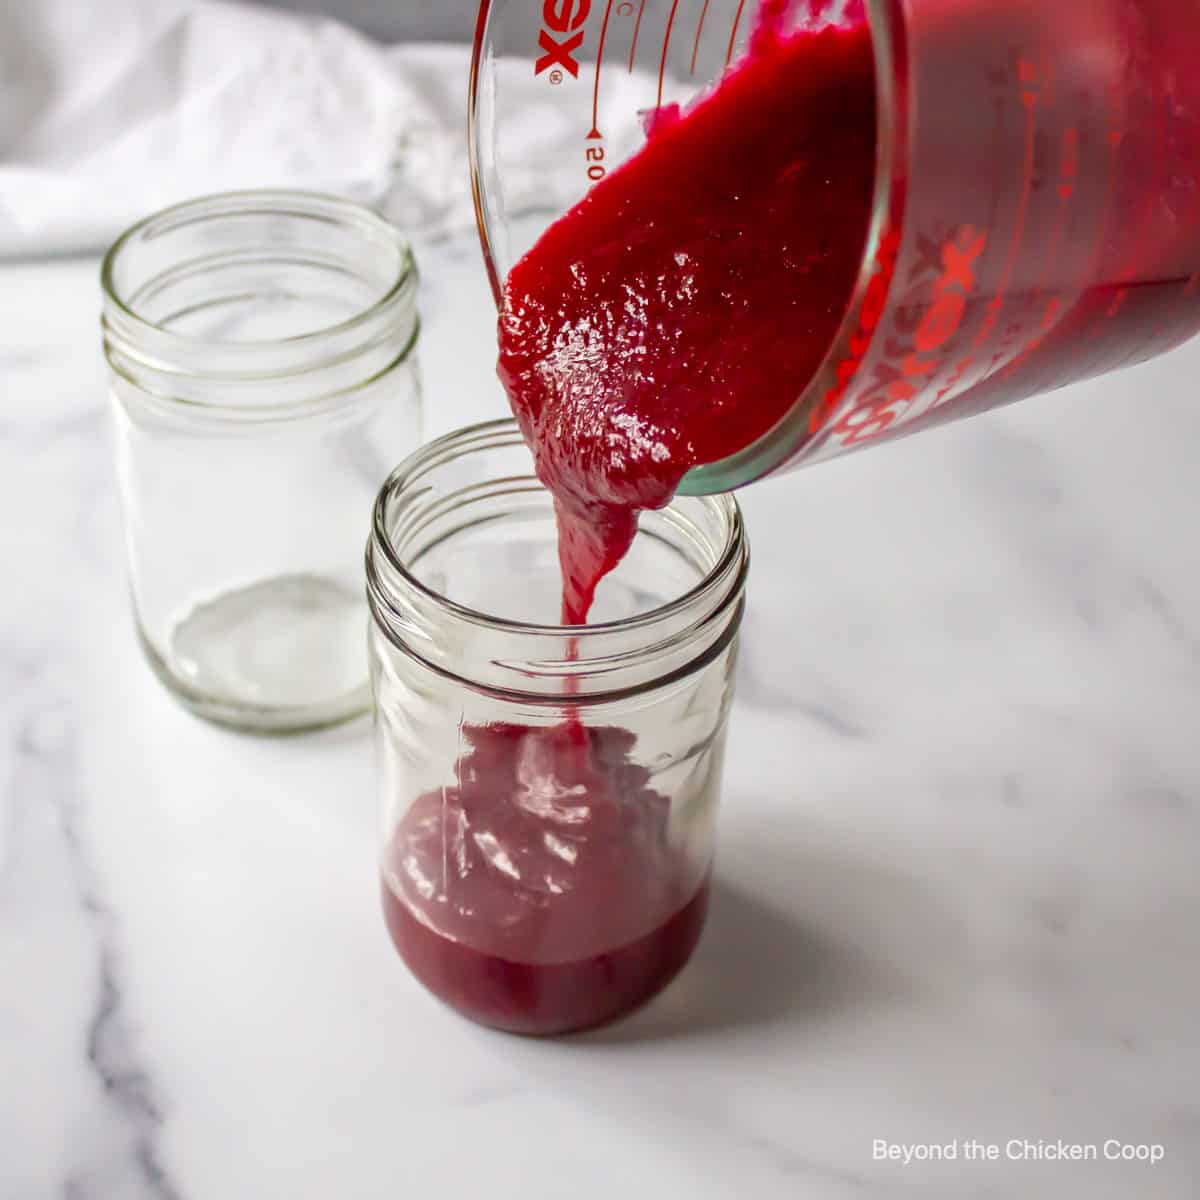 Pouring sauce into a jelly jar.